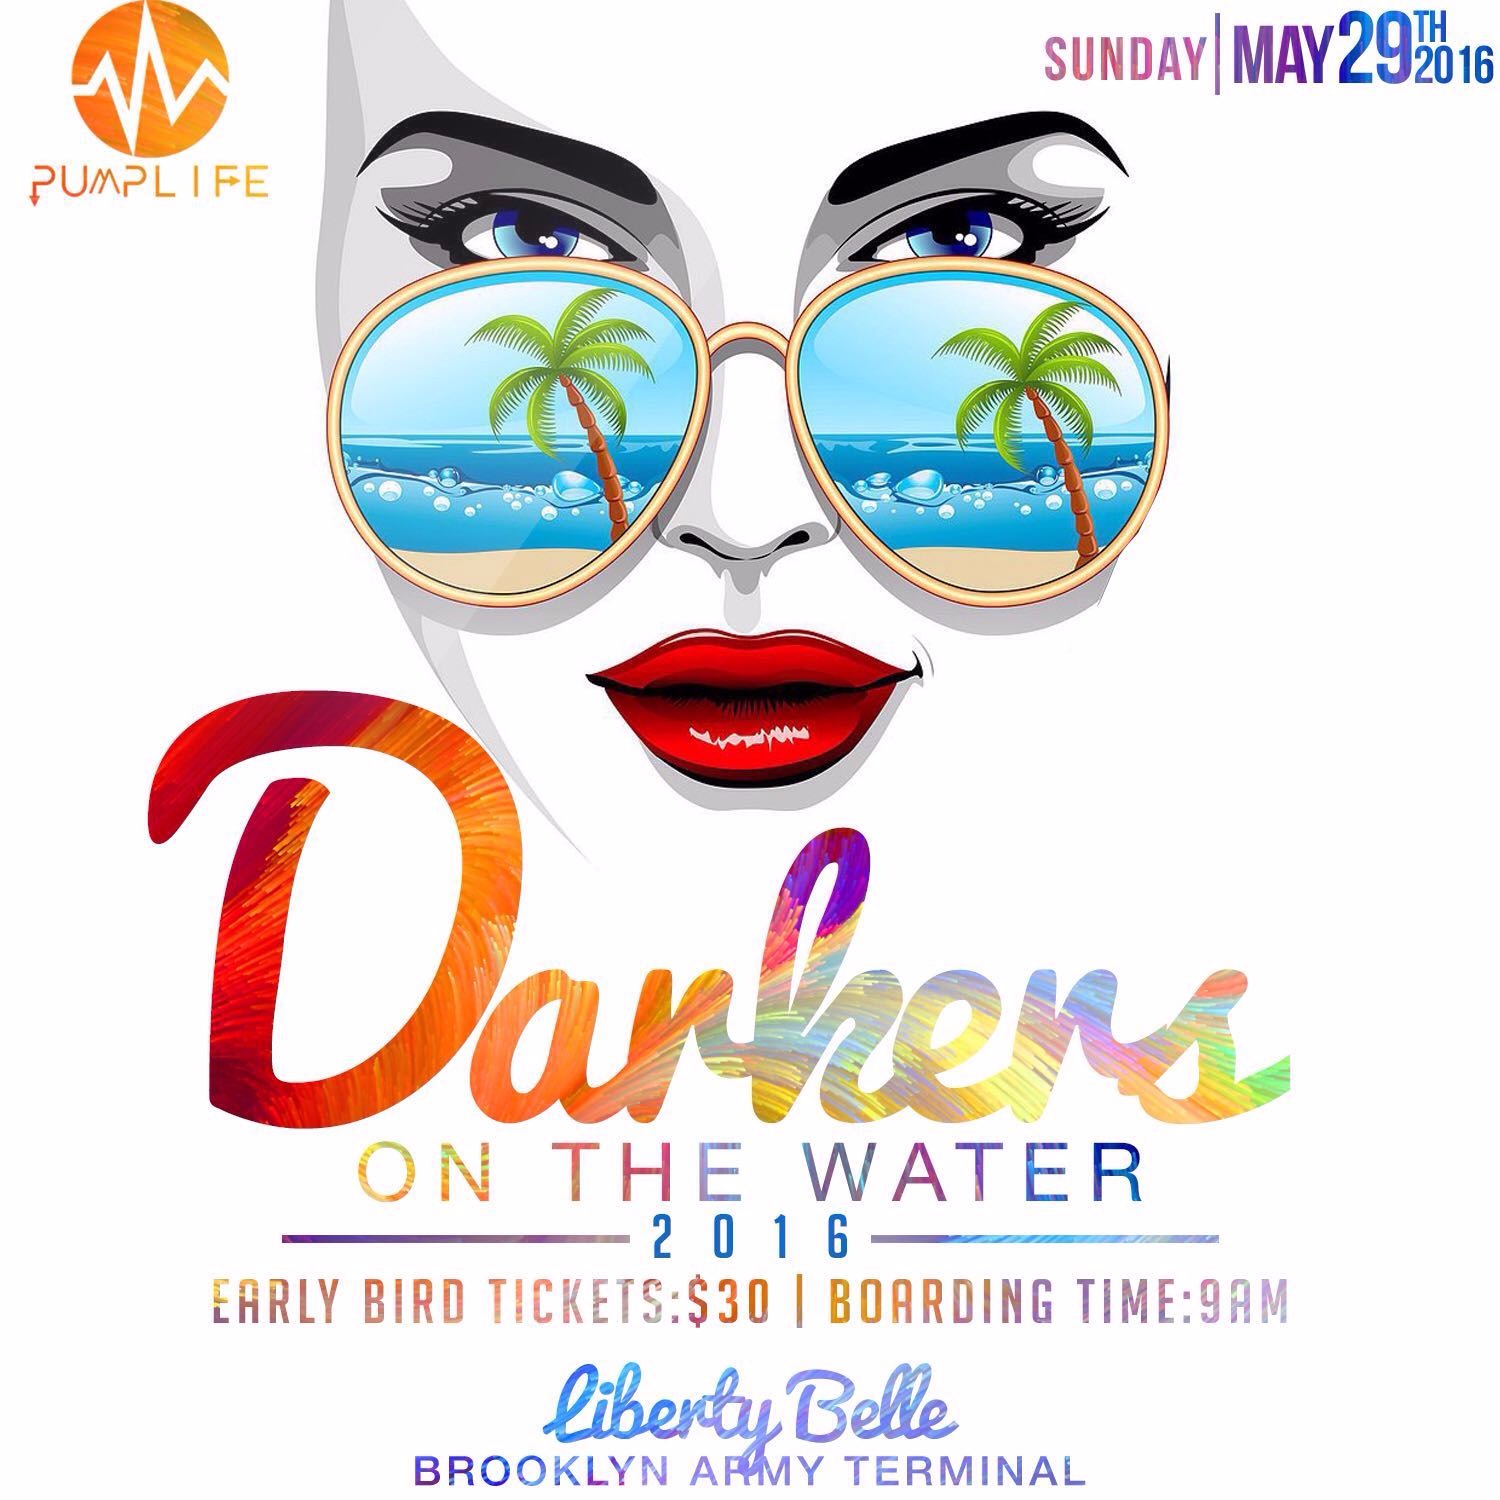 Darkers On The Water 2016